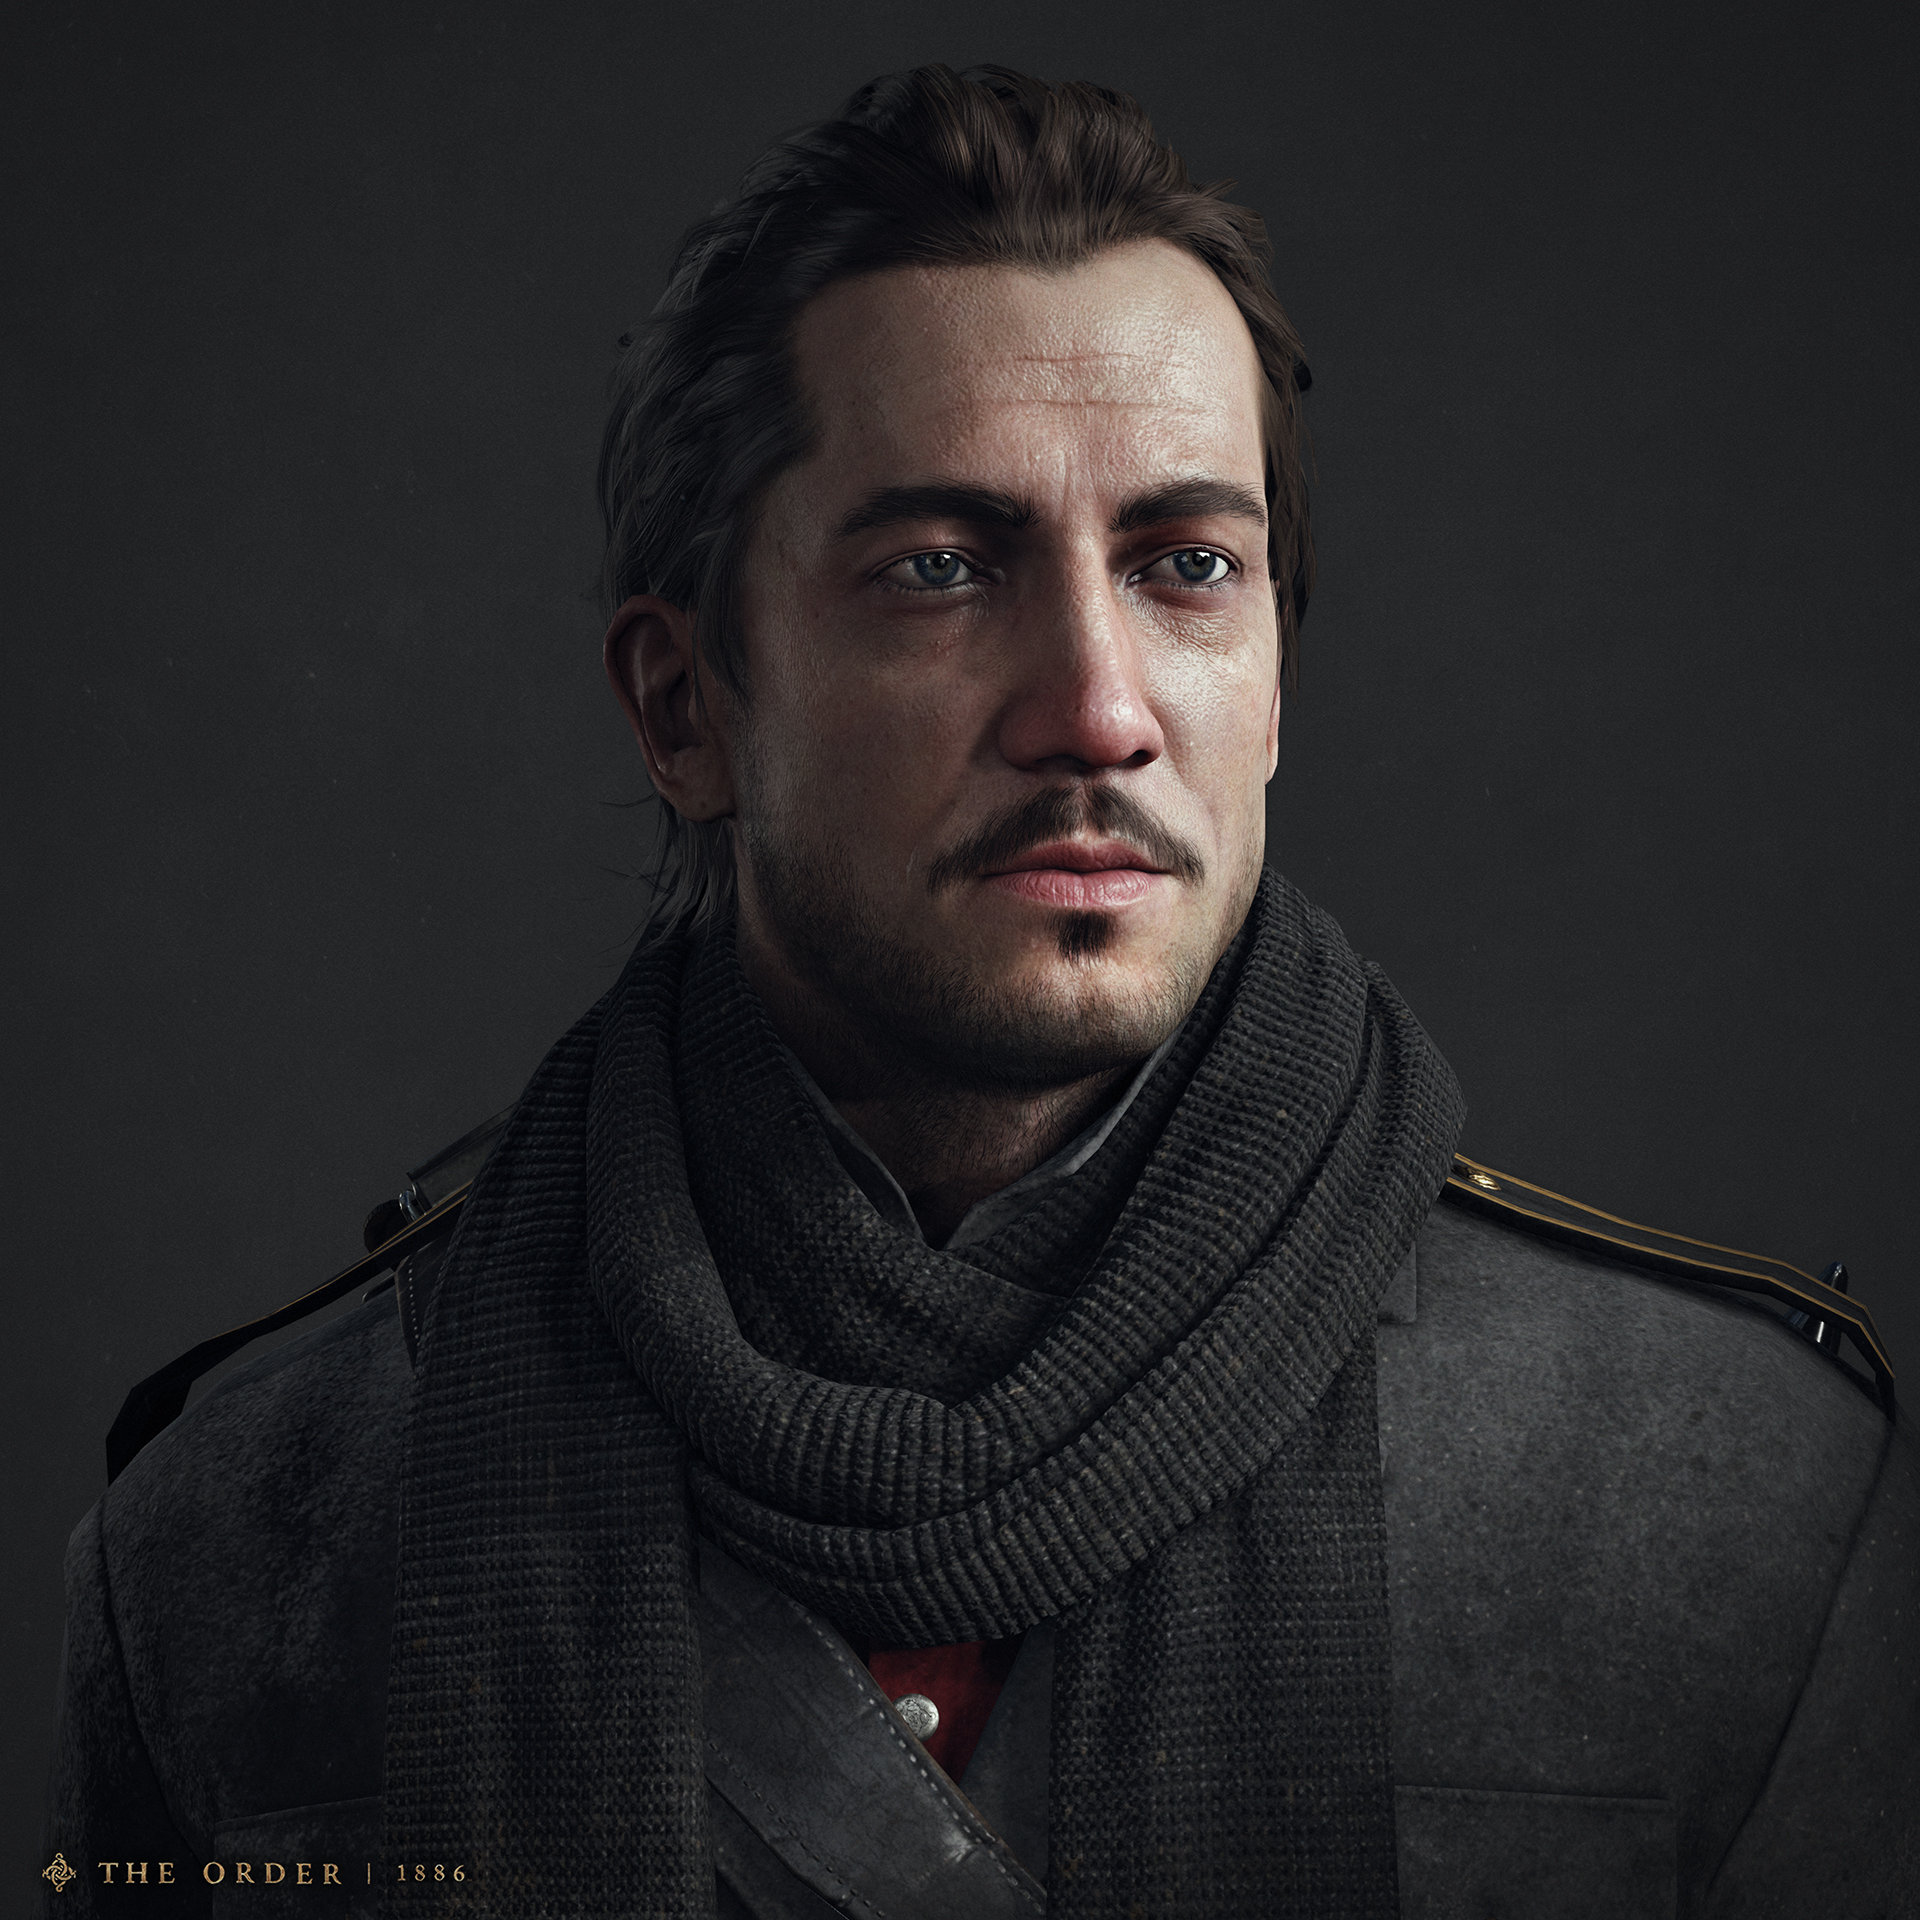 https://static.wikia.nocookie.net/theorder1886/images/5/55/Scot-andreason-laf-infiltration-portrait.jpg